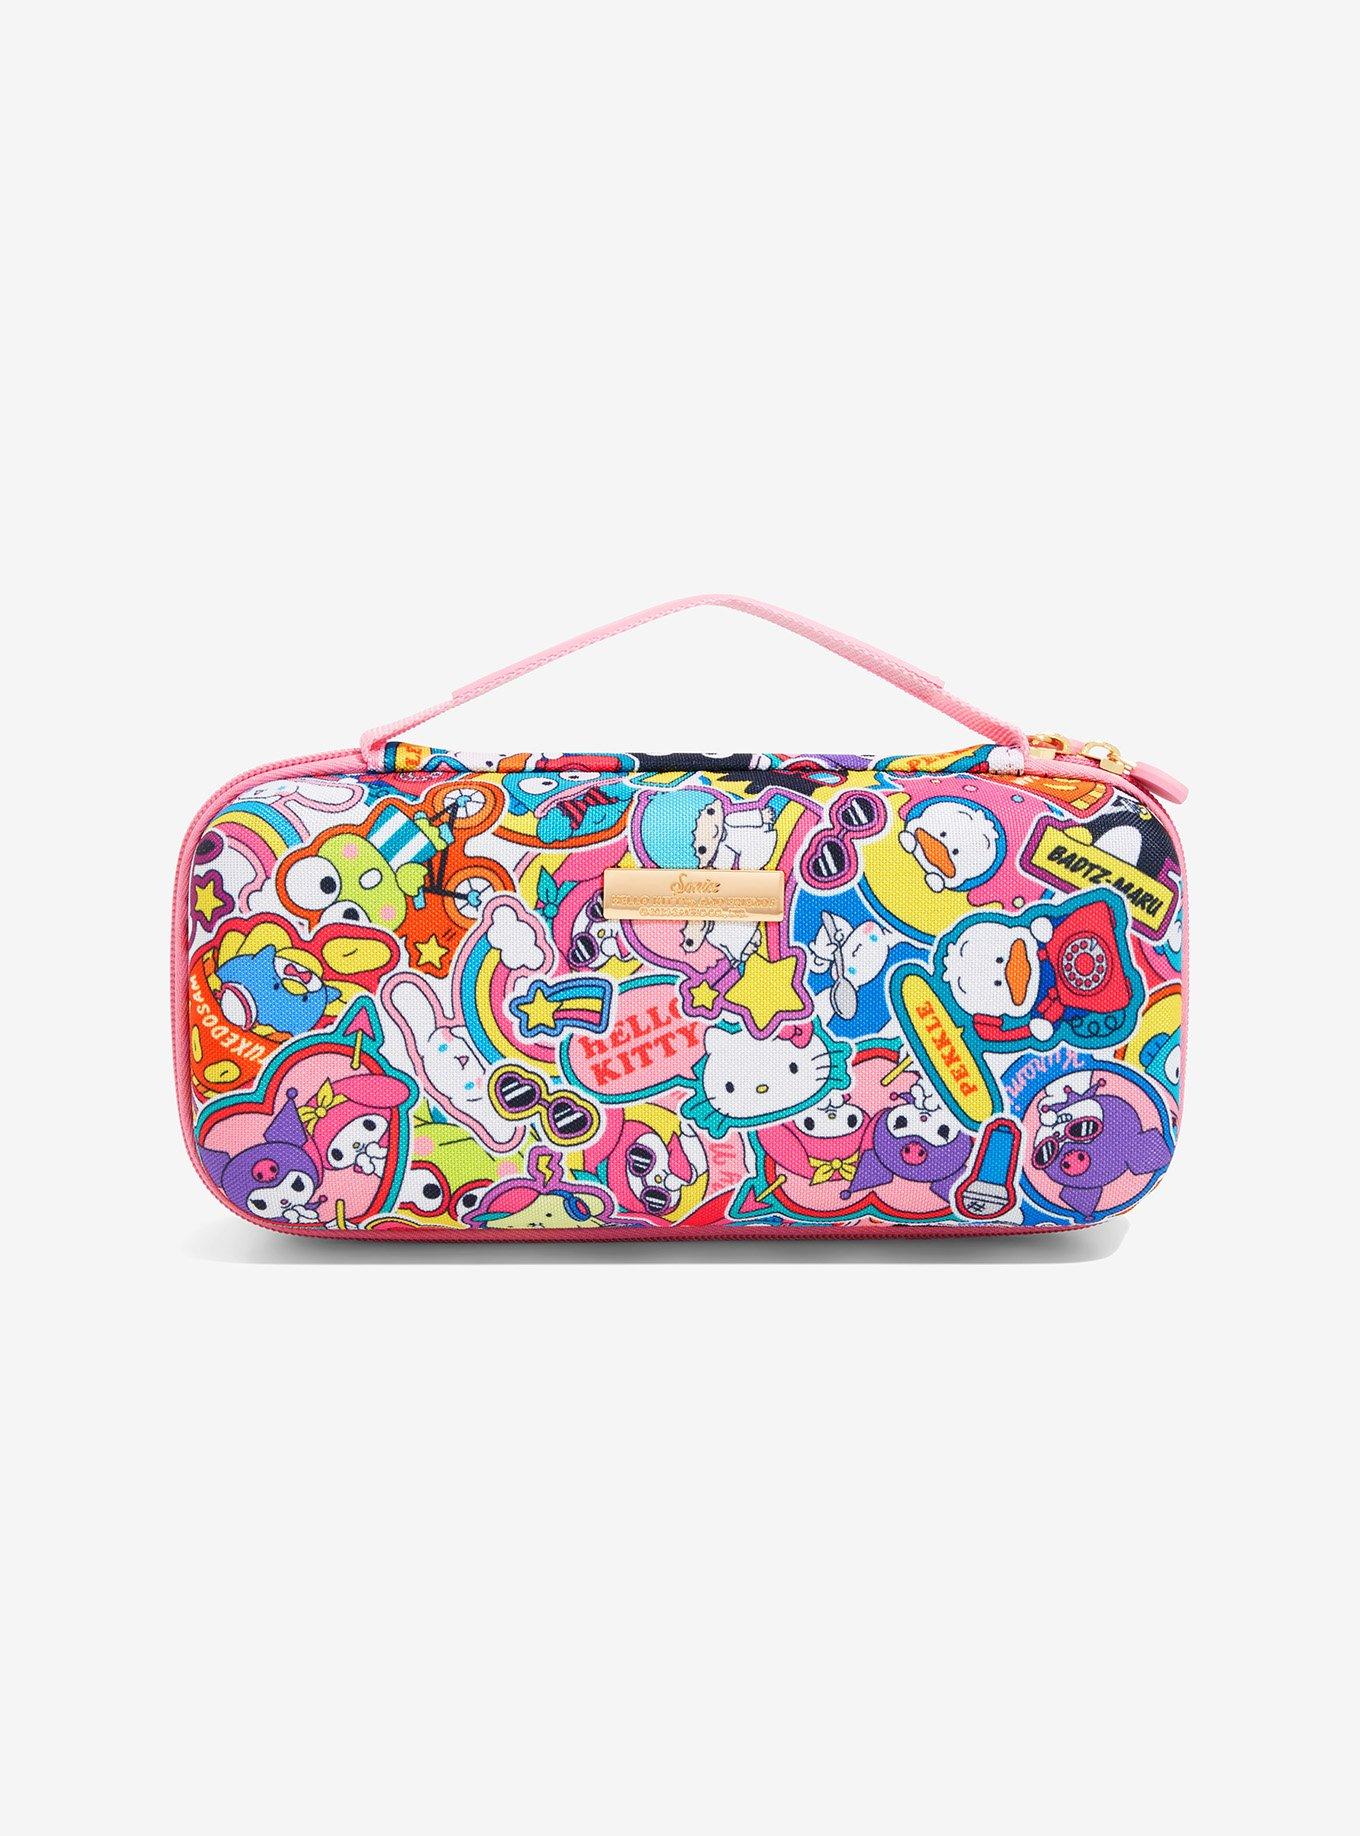 Buy Hello Kitty Printed Pencil Case with Zip Closure Online for Kids